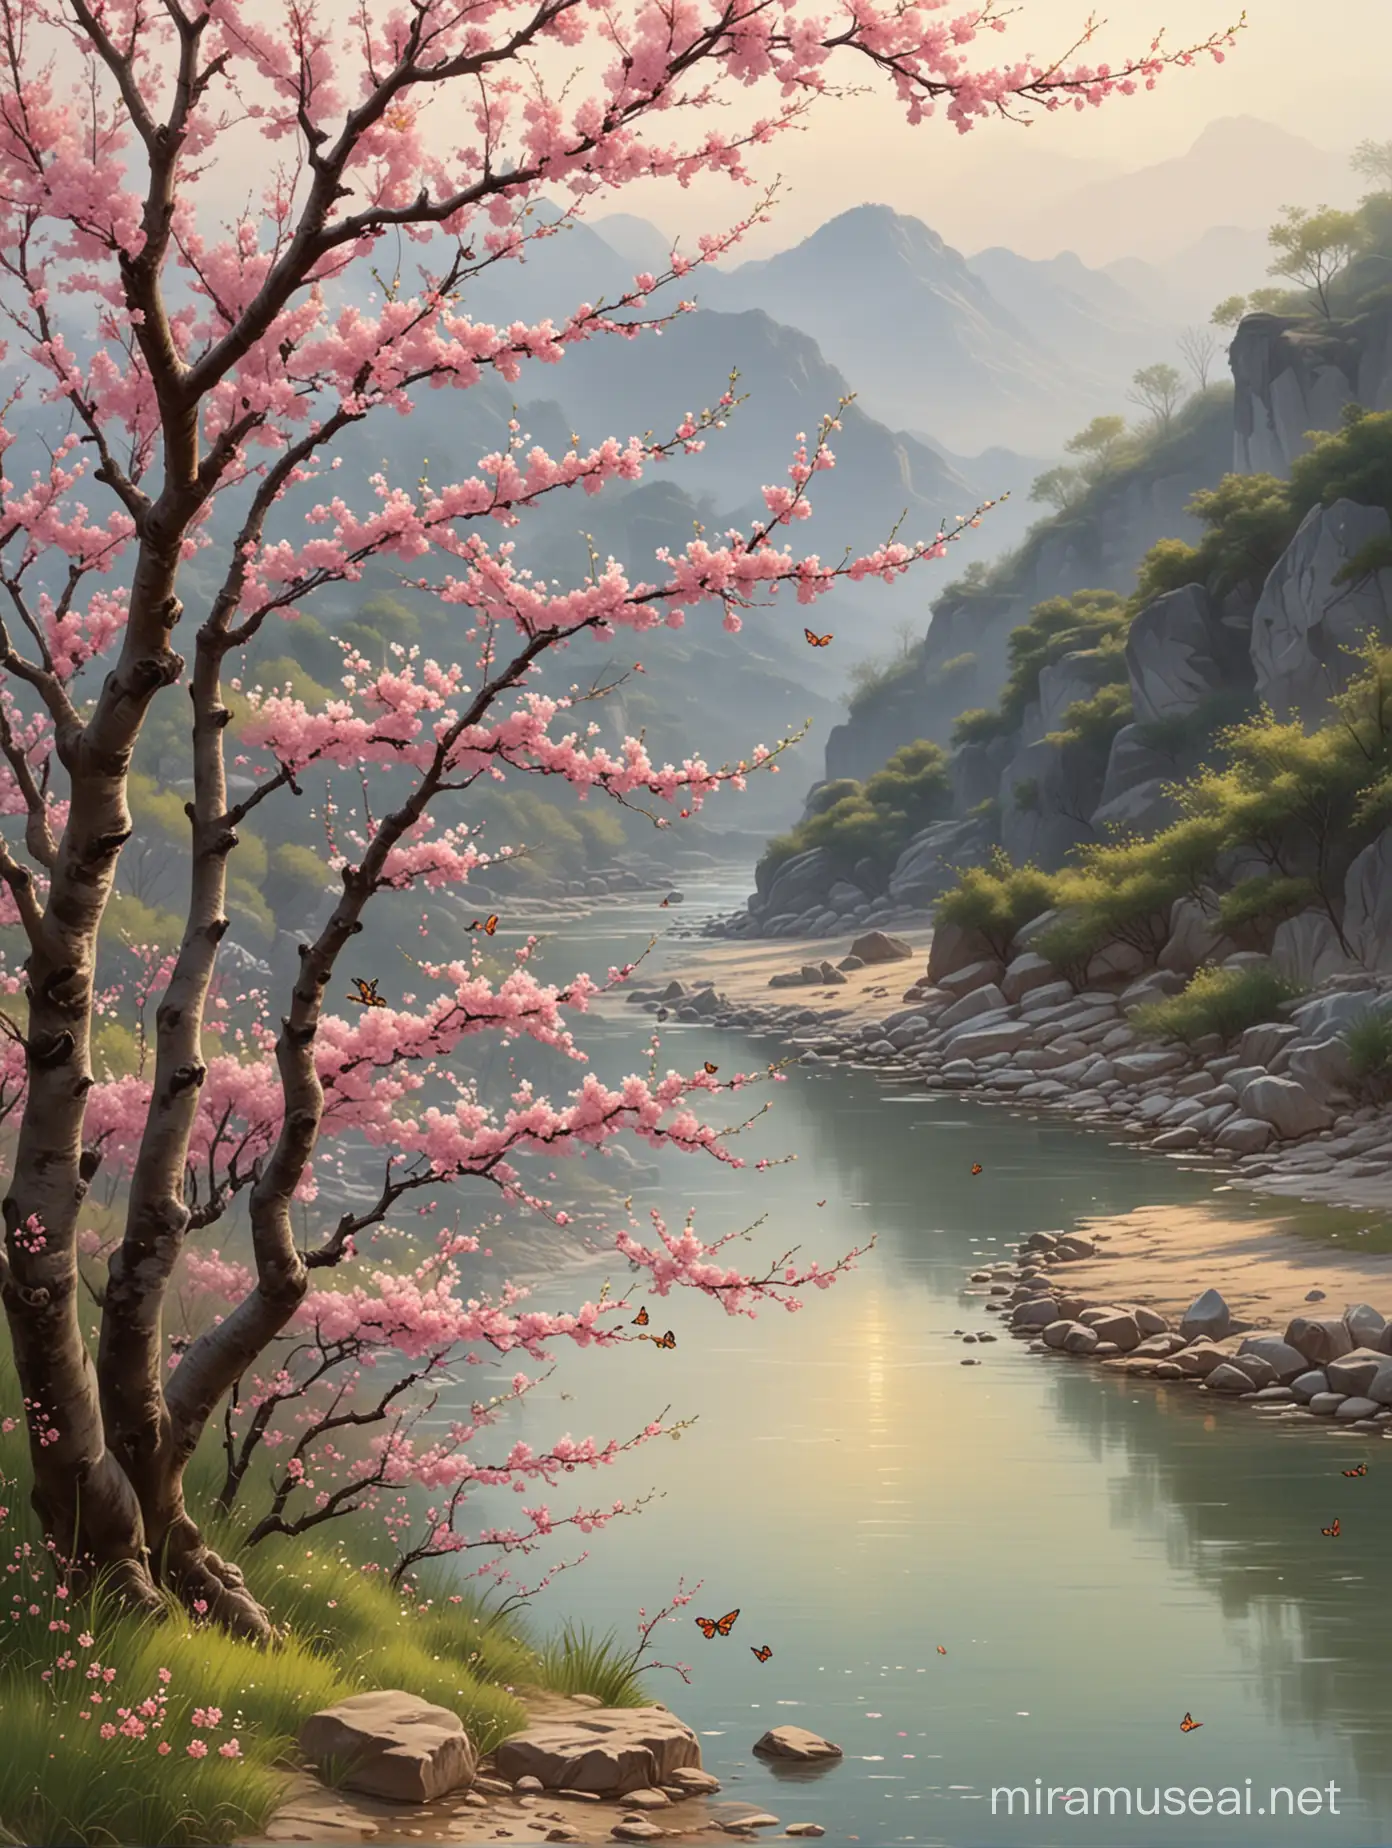 Peach Blossom Tree by River with Dancing Butterflies